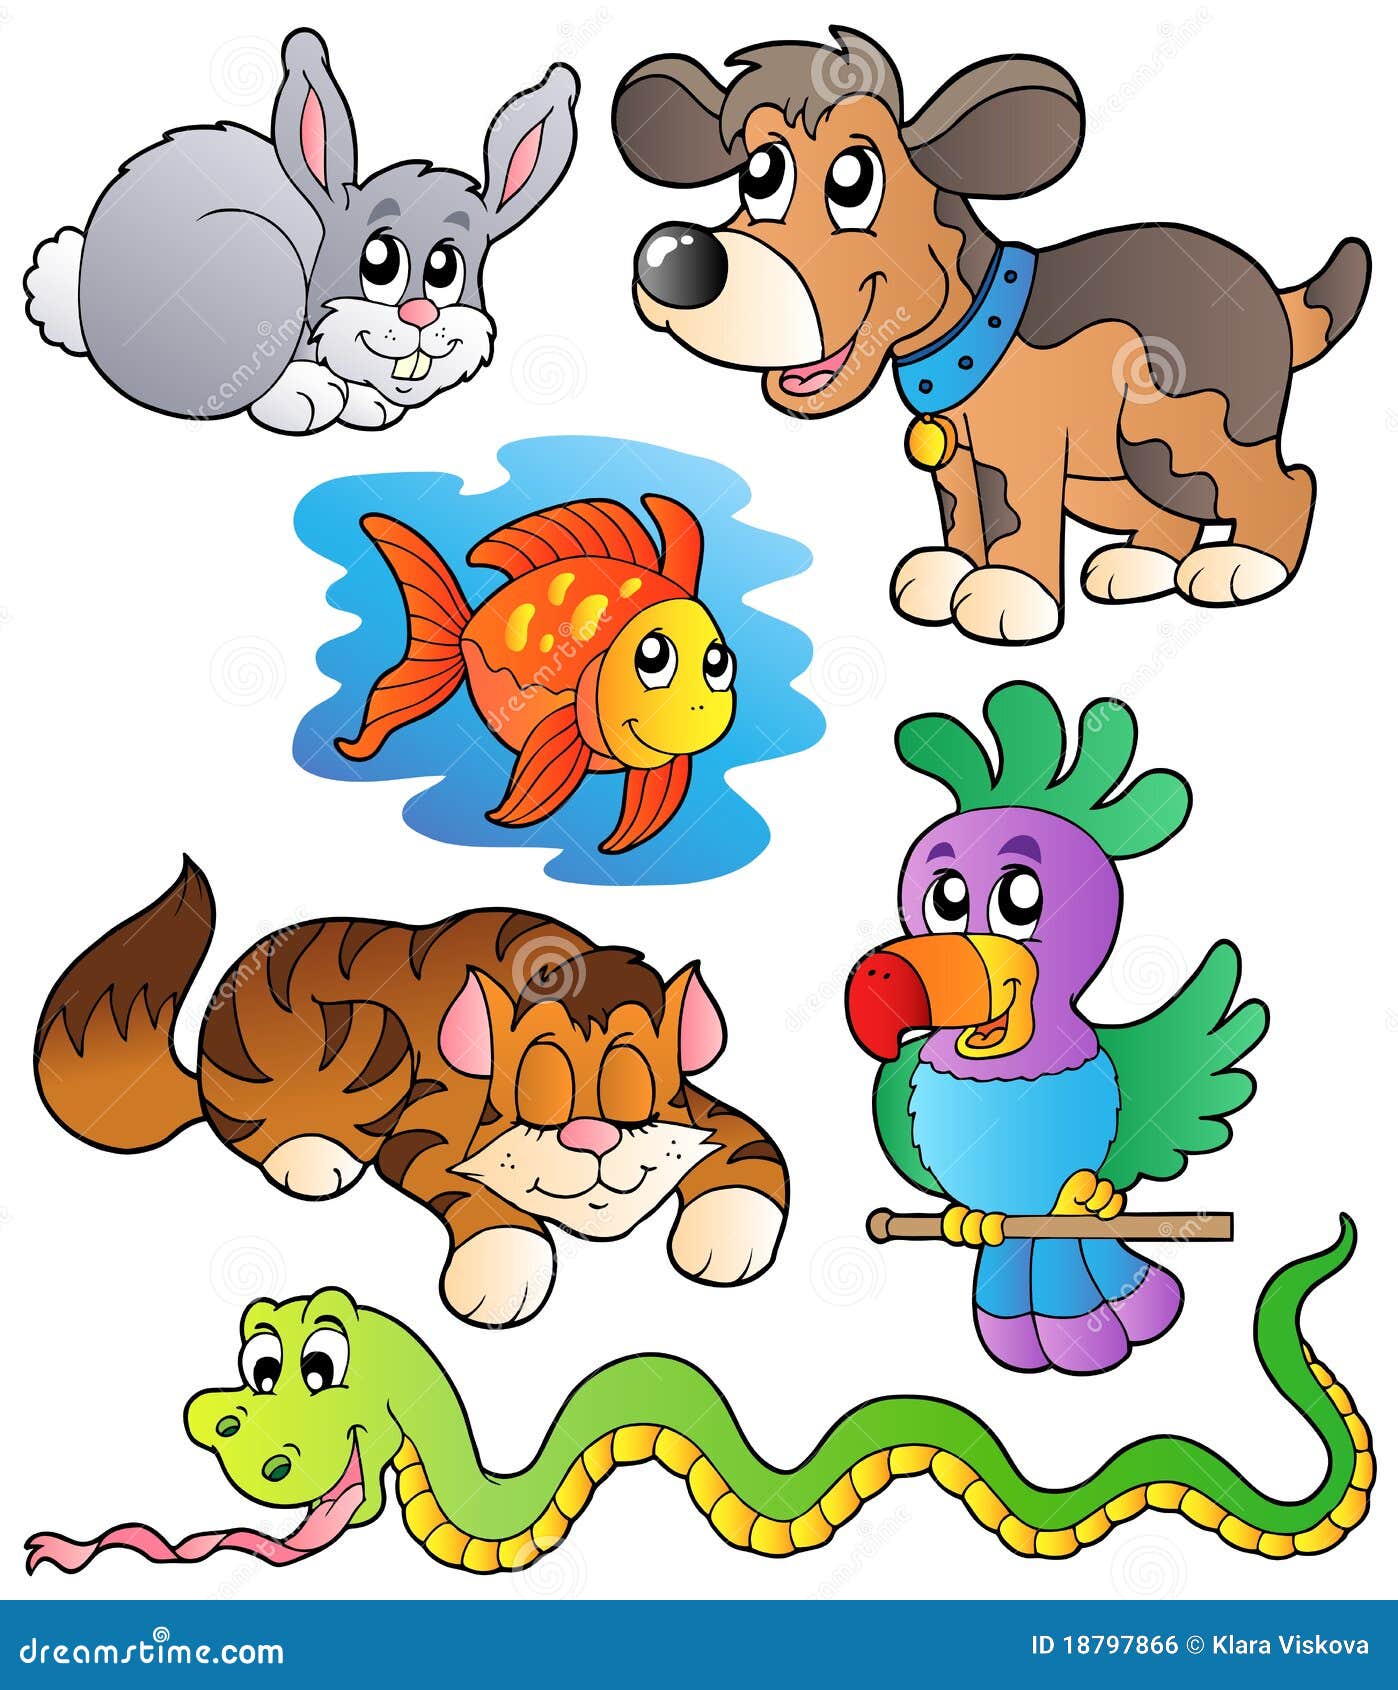 Happy pets collection 1 stock vector. Illustration of